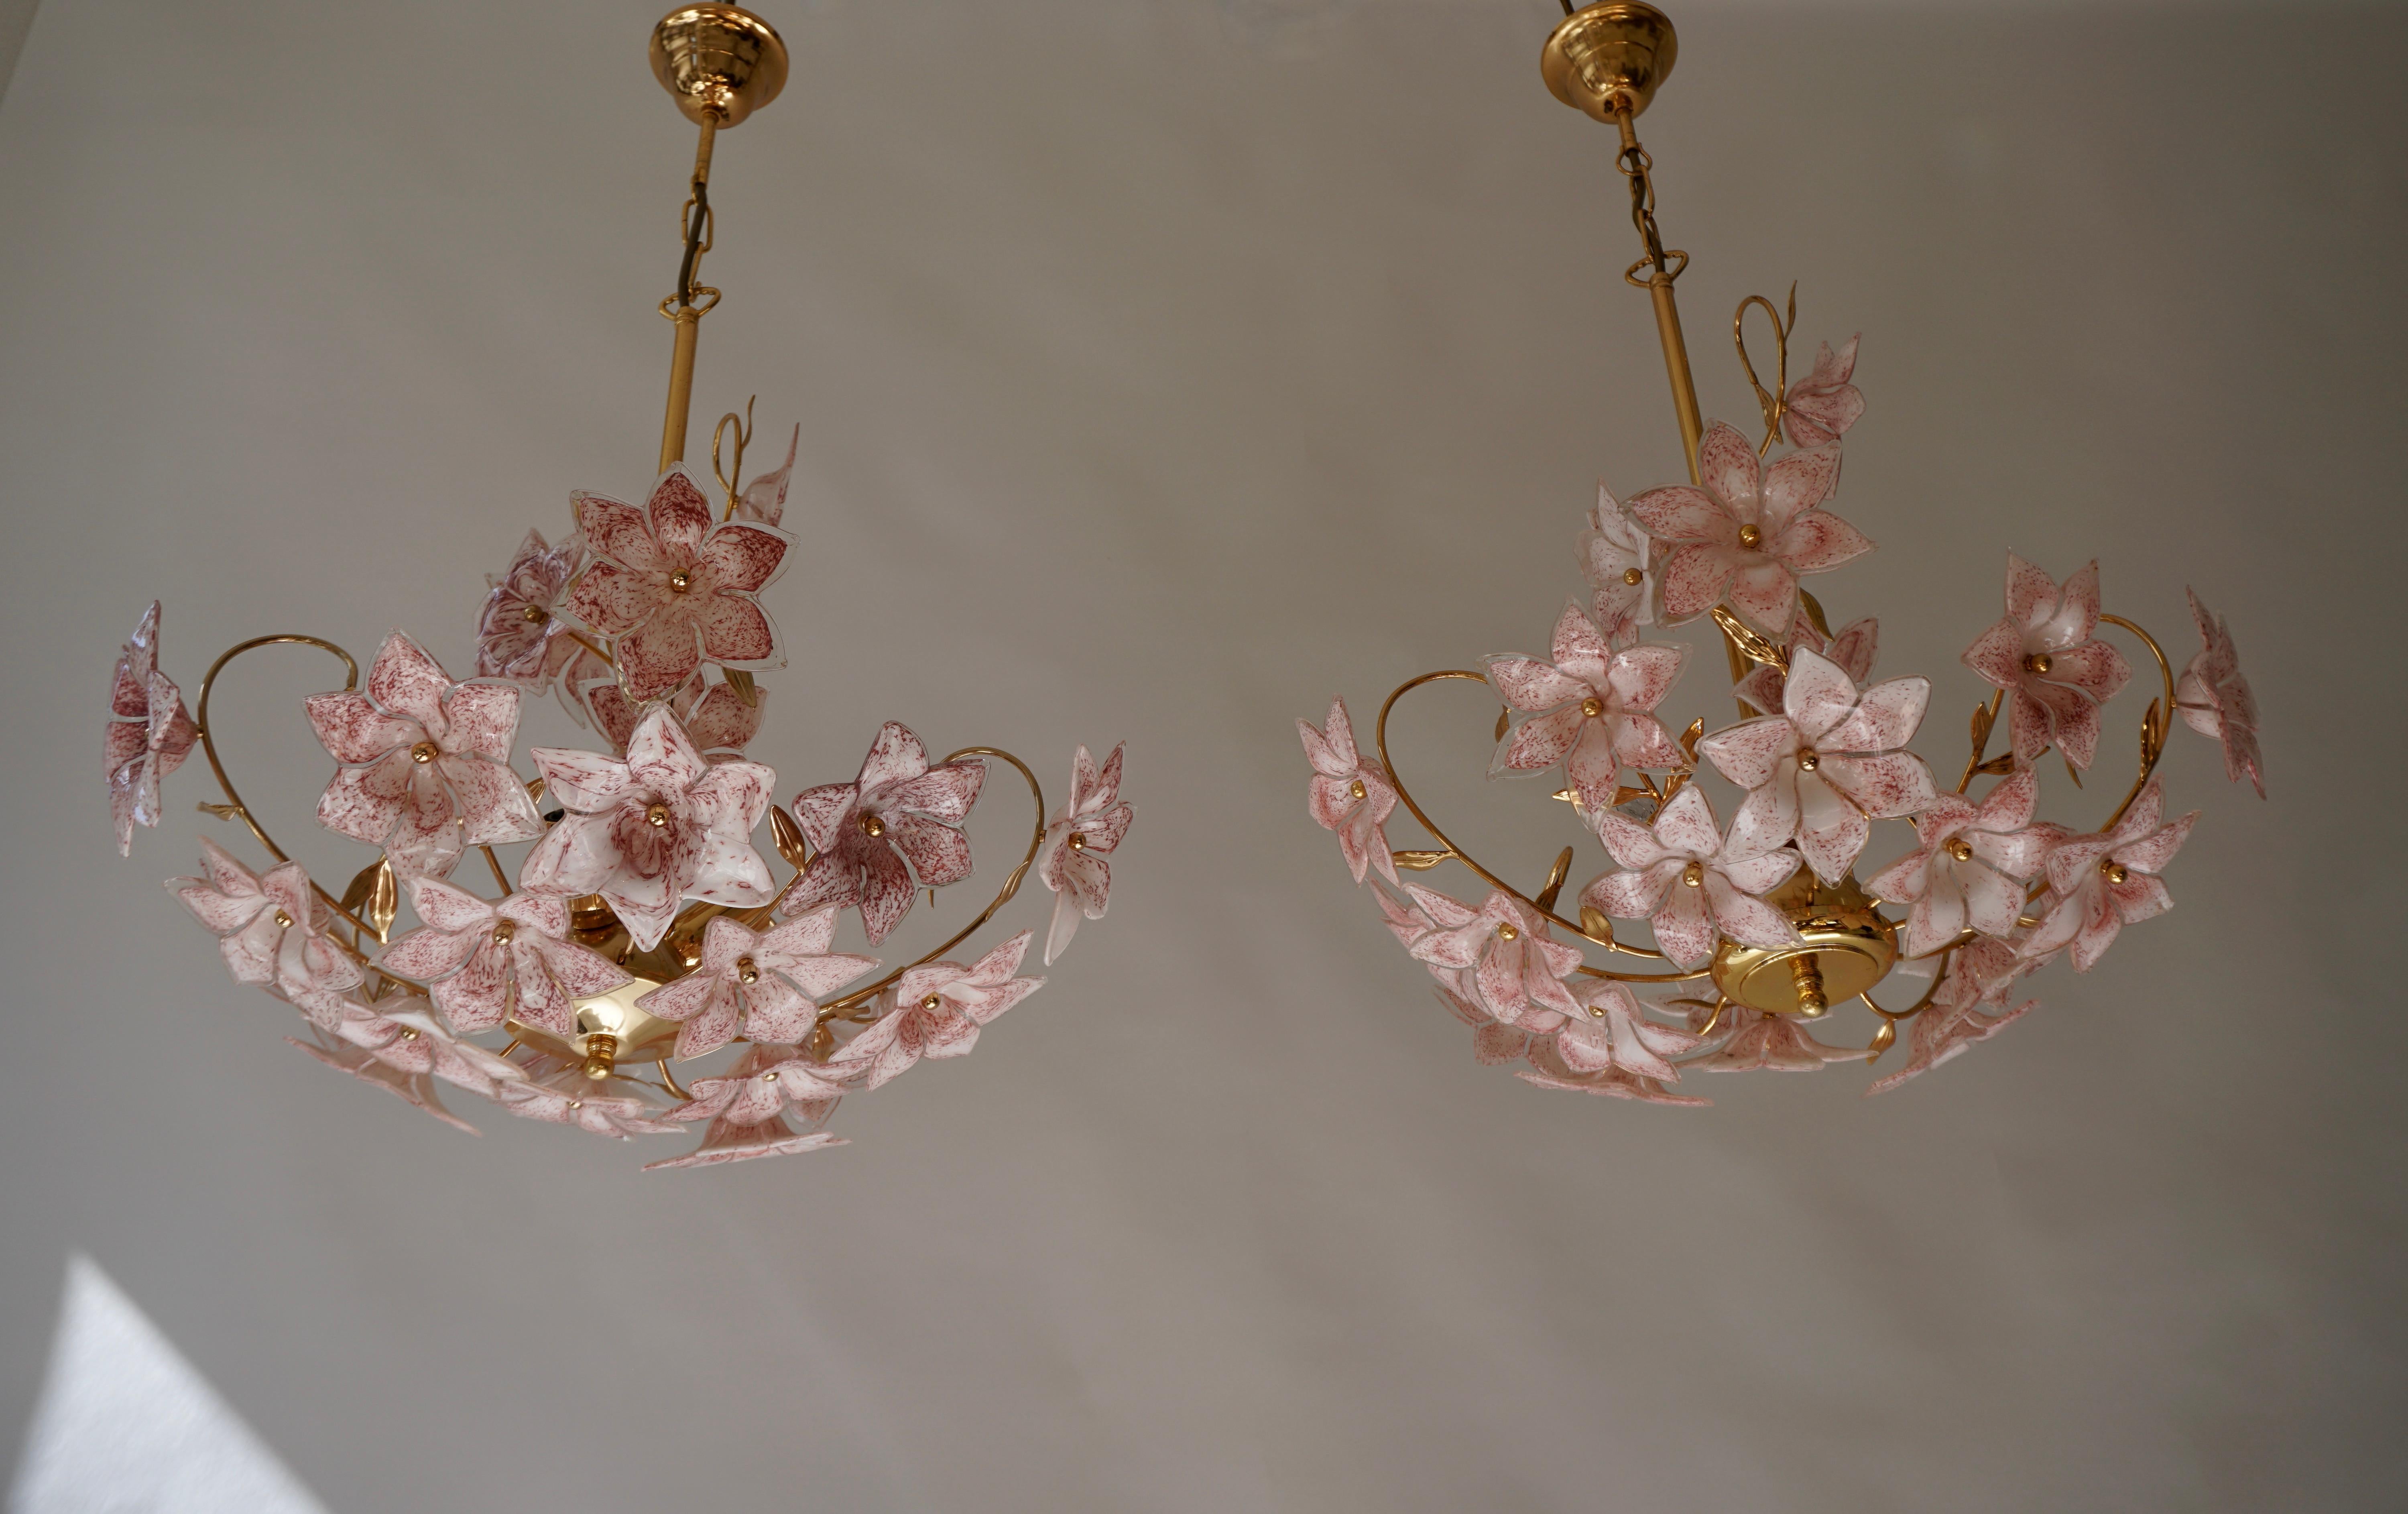 Set of 2 Italian brass chandeliers whit white pink Murano colored glass flowers.

The chandeliers are almost exactly the same, only the round brass plate at the bottom has a slightly different shape.
And the glass Murano flowers also have a slightly